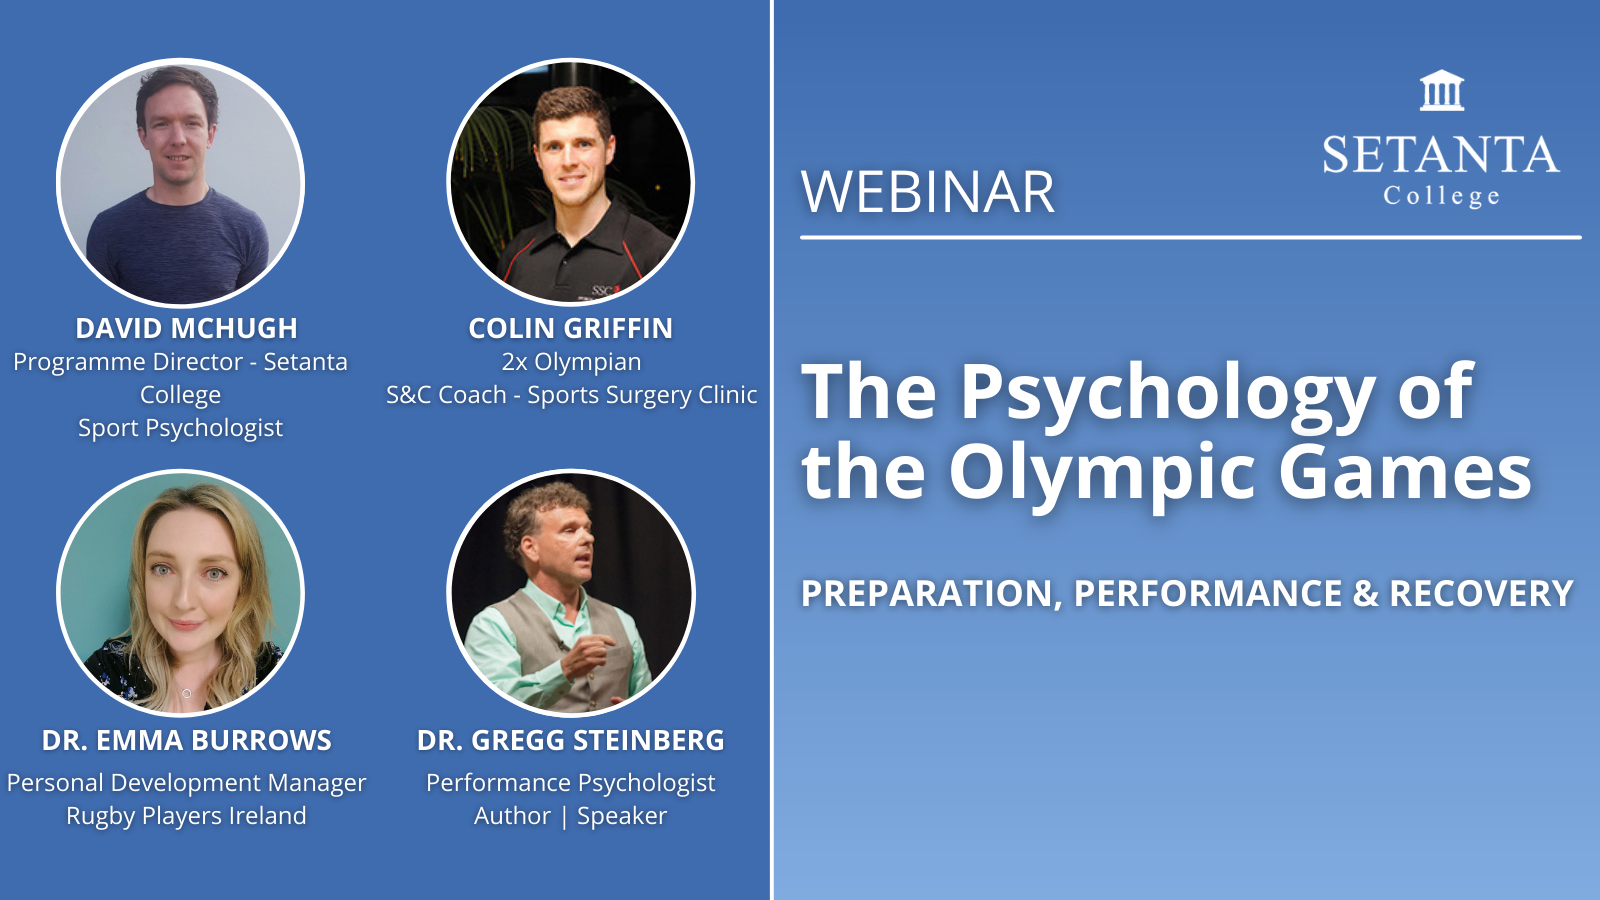 The Psychology of the Olympic Games